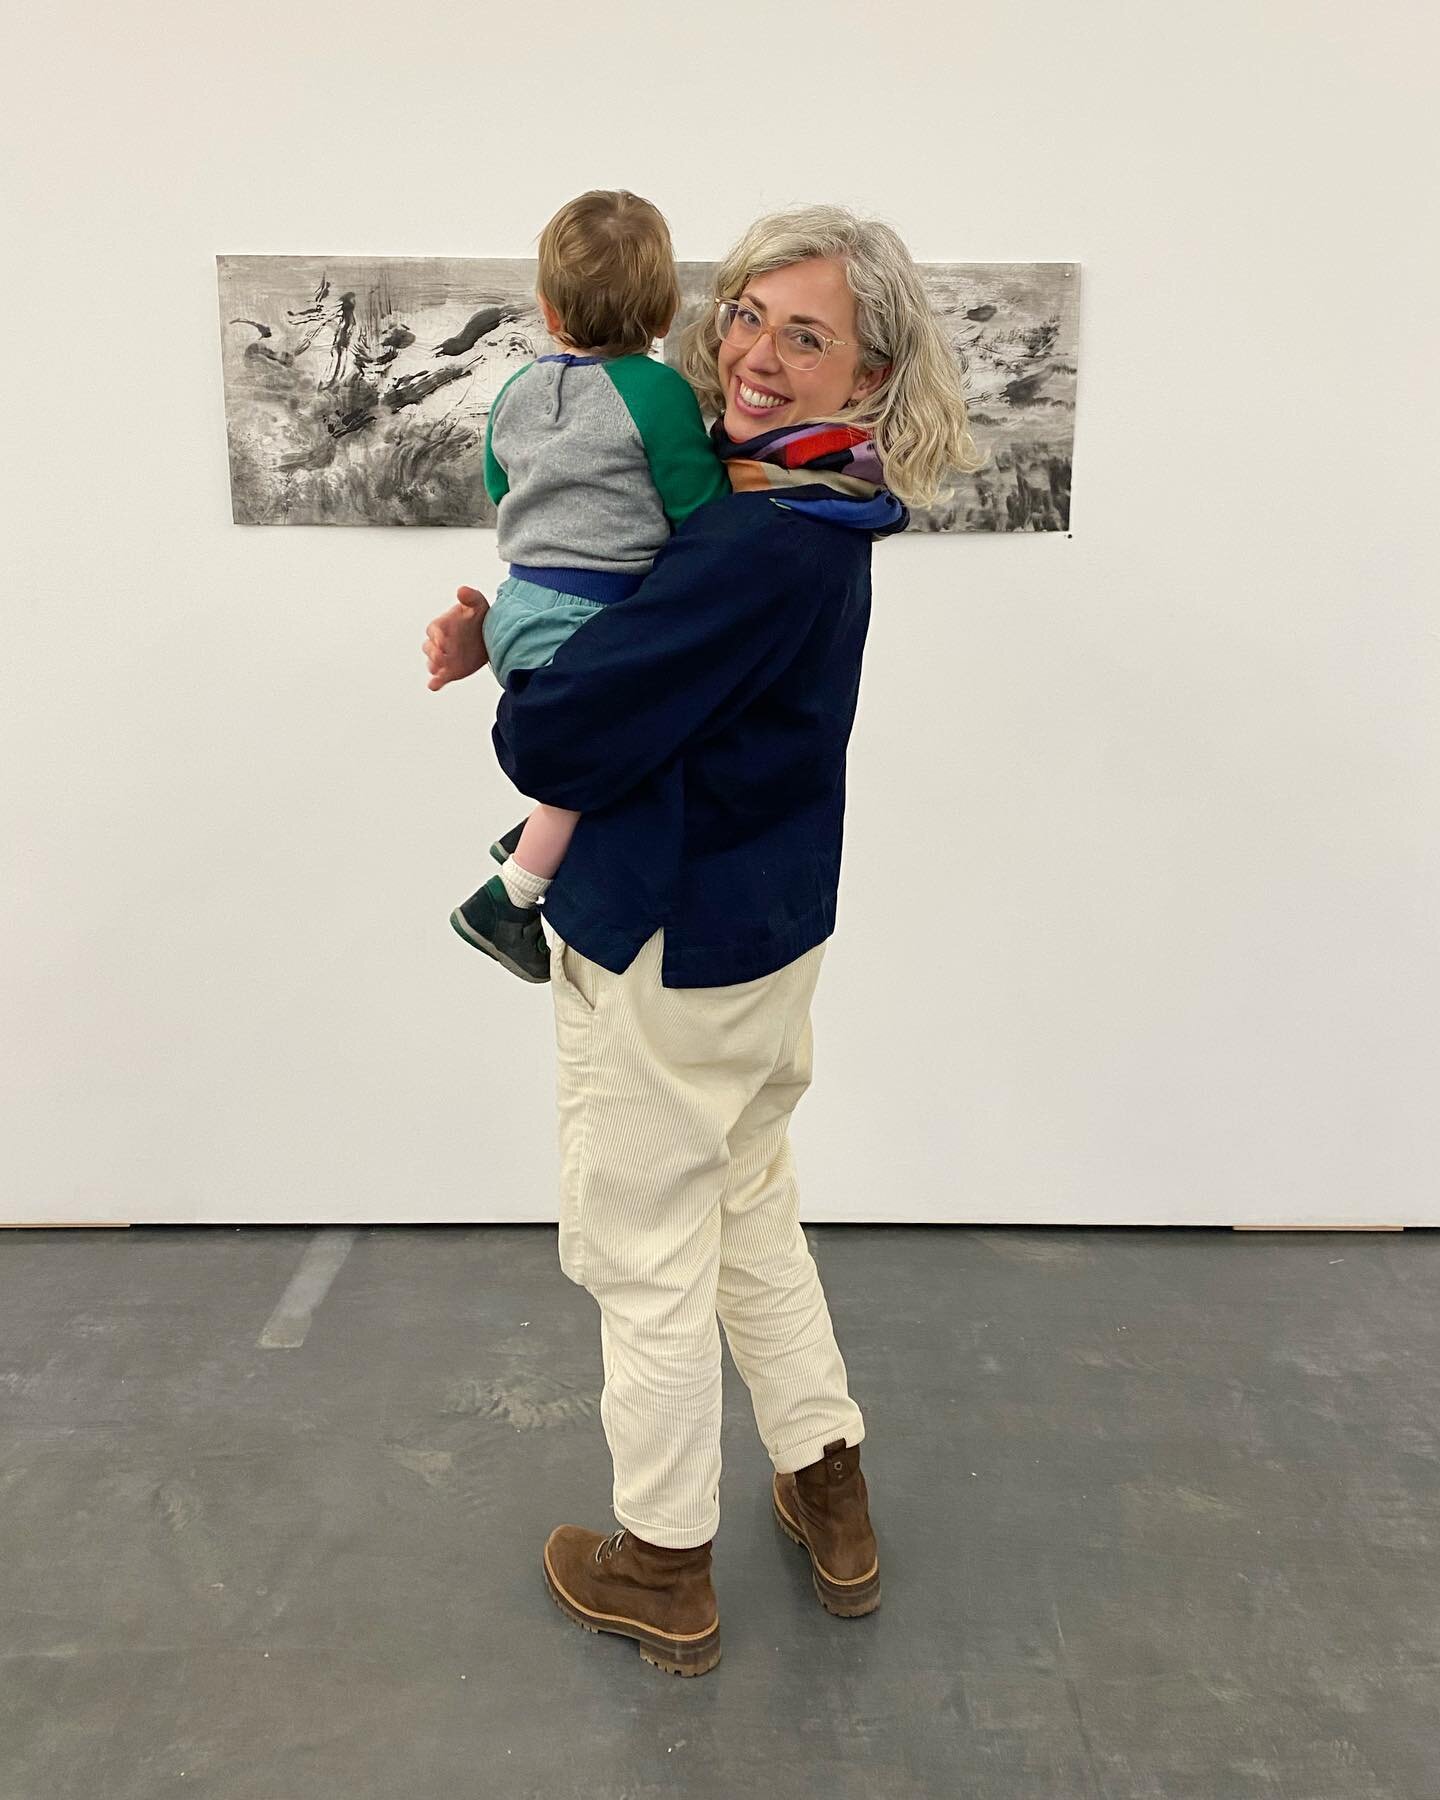 A happy moment today showing Kit the work I made whilst pregnant with him. Very much the start of figuring out my new life as an artist and mother&hellip; Grateful to so many accounts and artists on here who give me hope and inspiration. 
Not least @